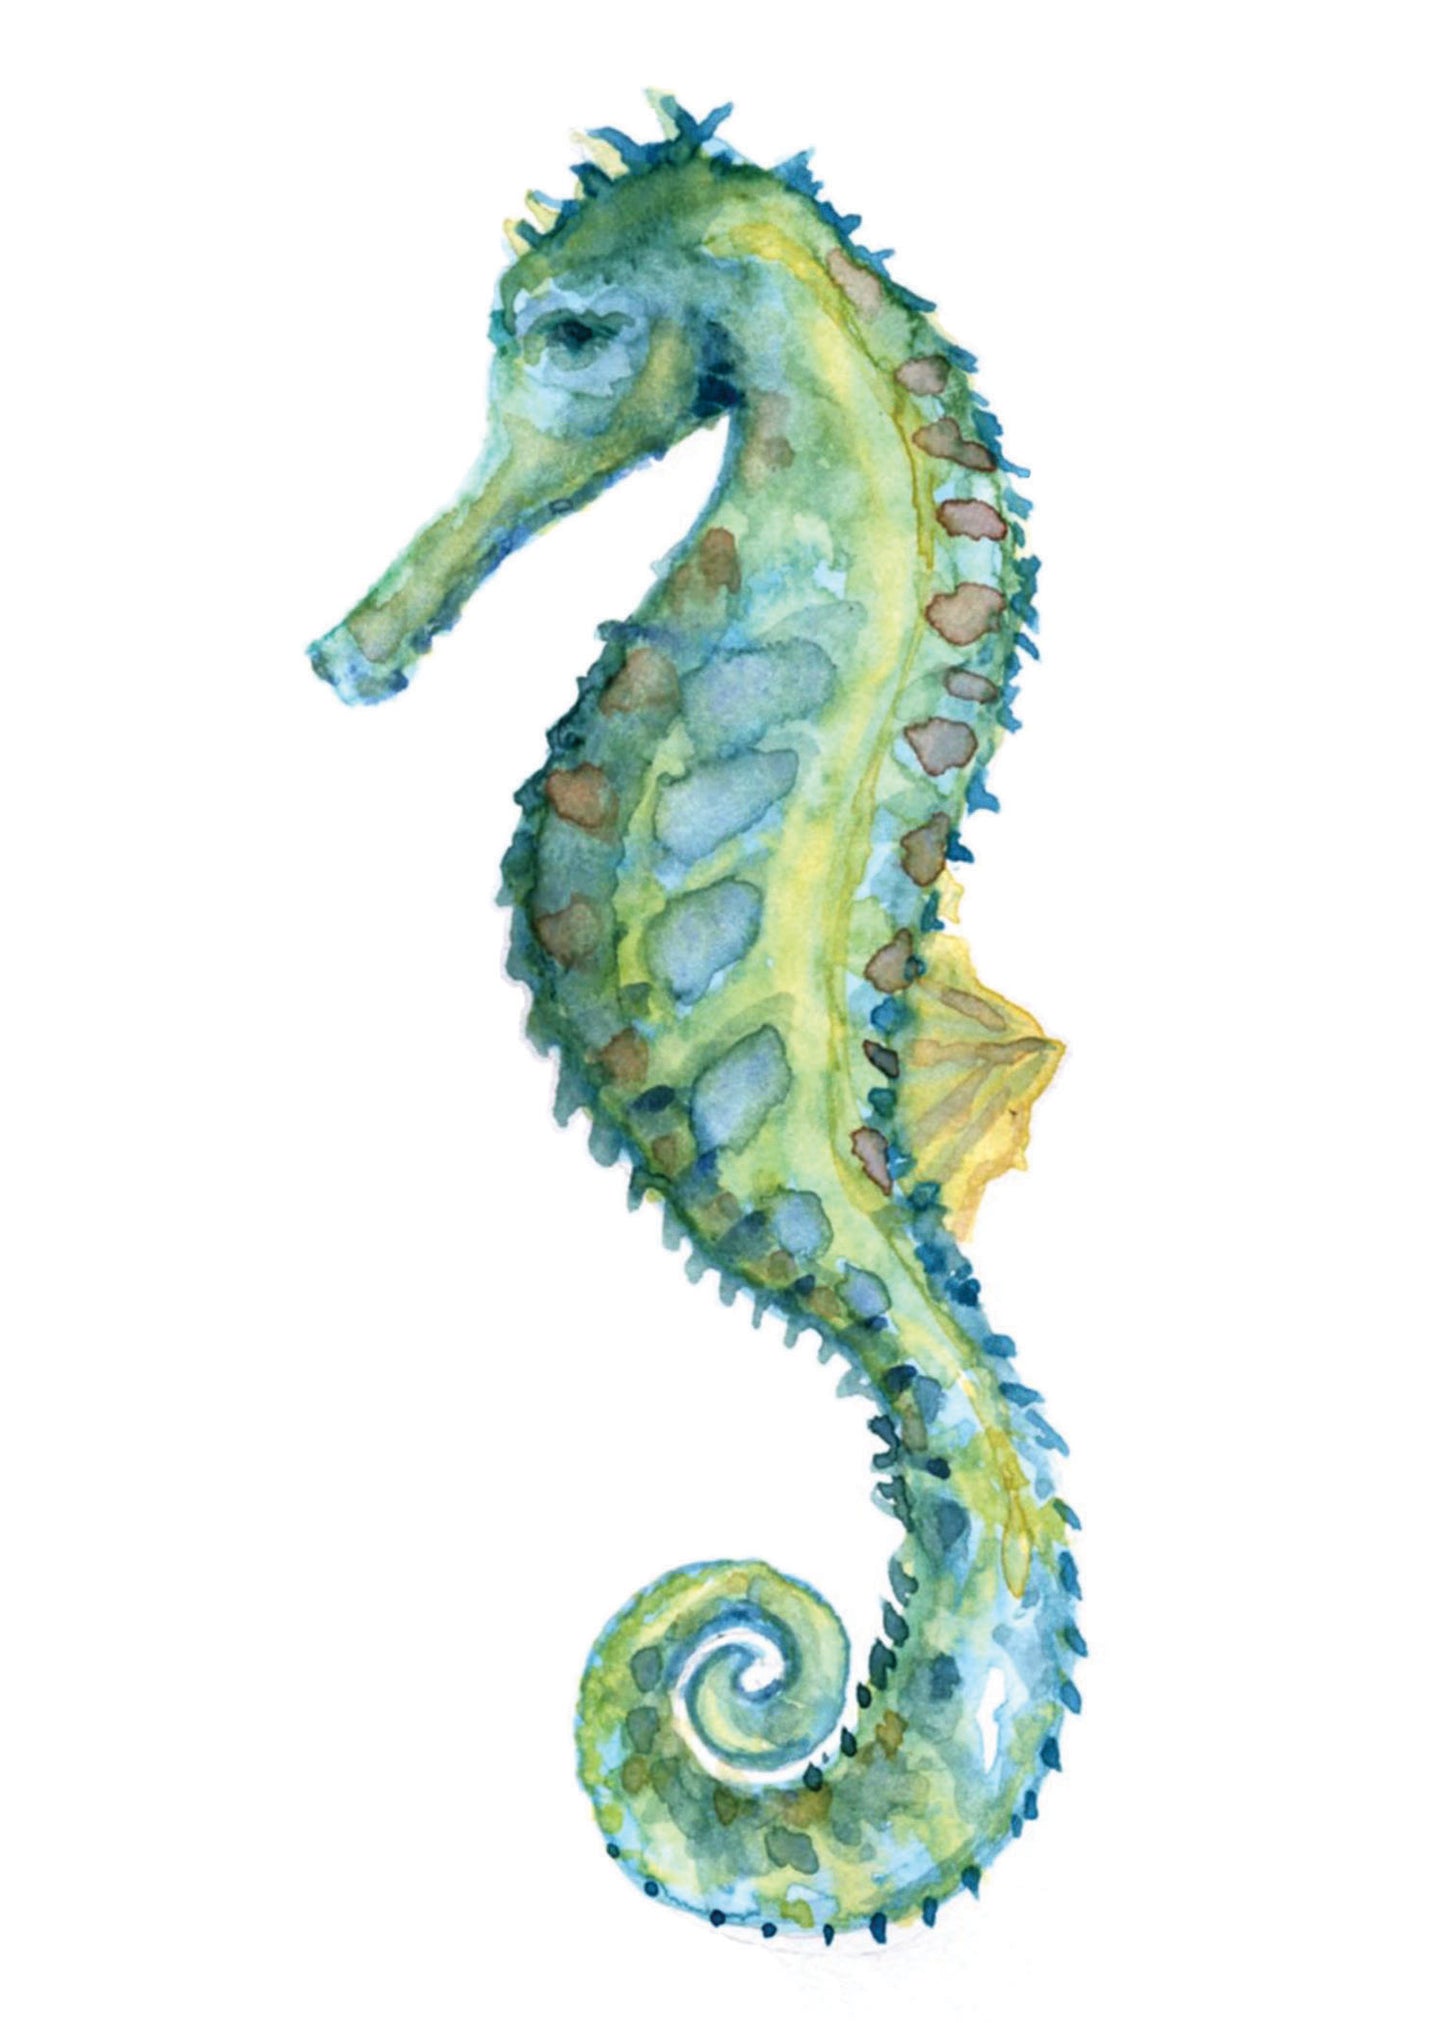 Blue Seahorse Watercolor Print on Wood Block 5x5 or 8x8 – Flamingo Shores -  Original Art for Home Decor and Gifts